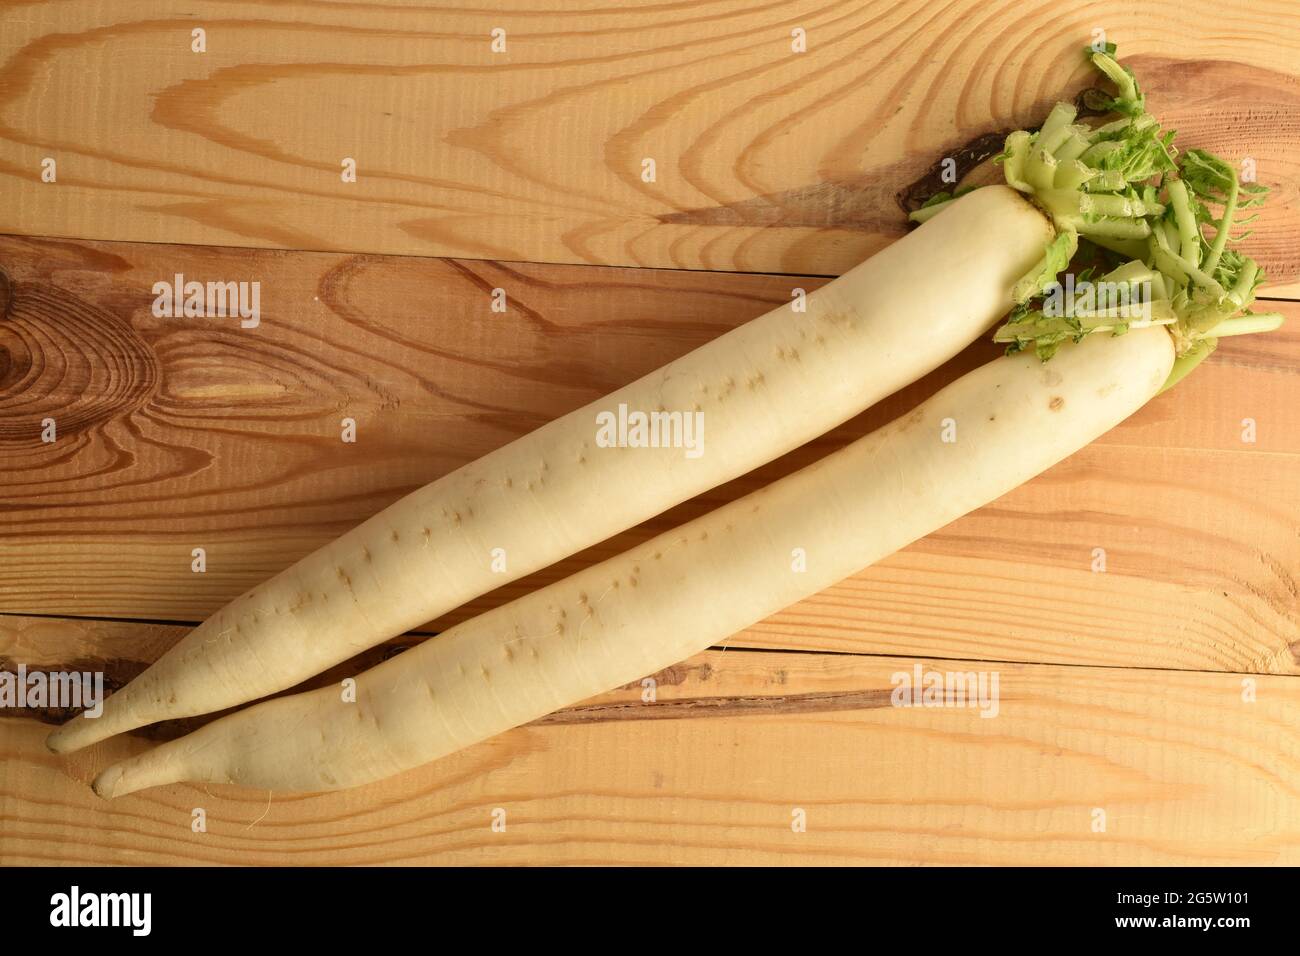 Two ripe organic radishes, close-up, on a wooden table, top view. Stock Photo